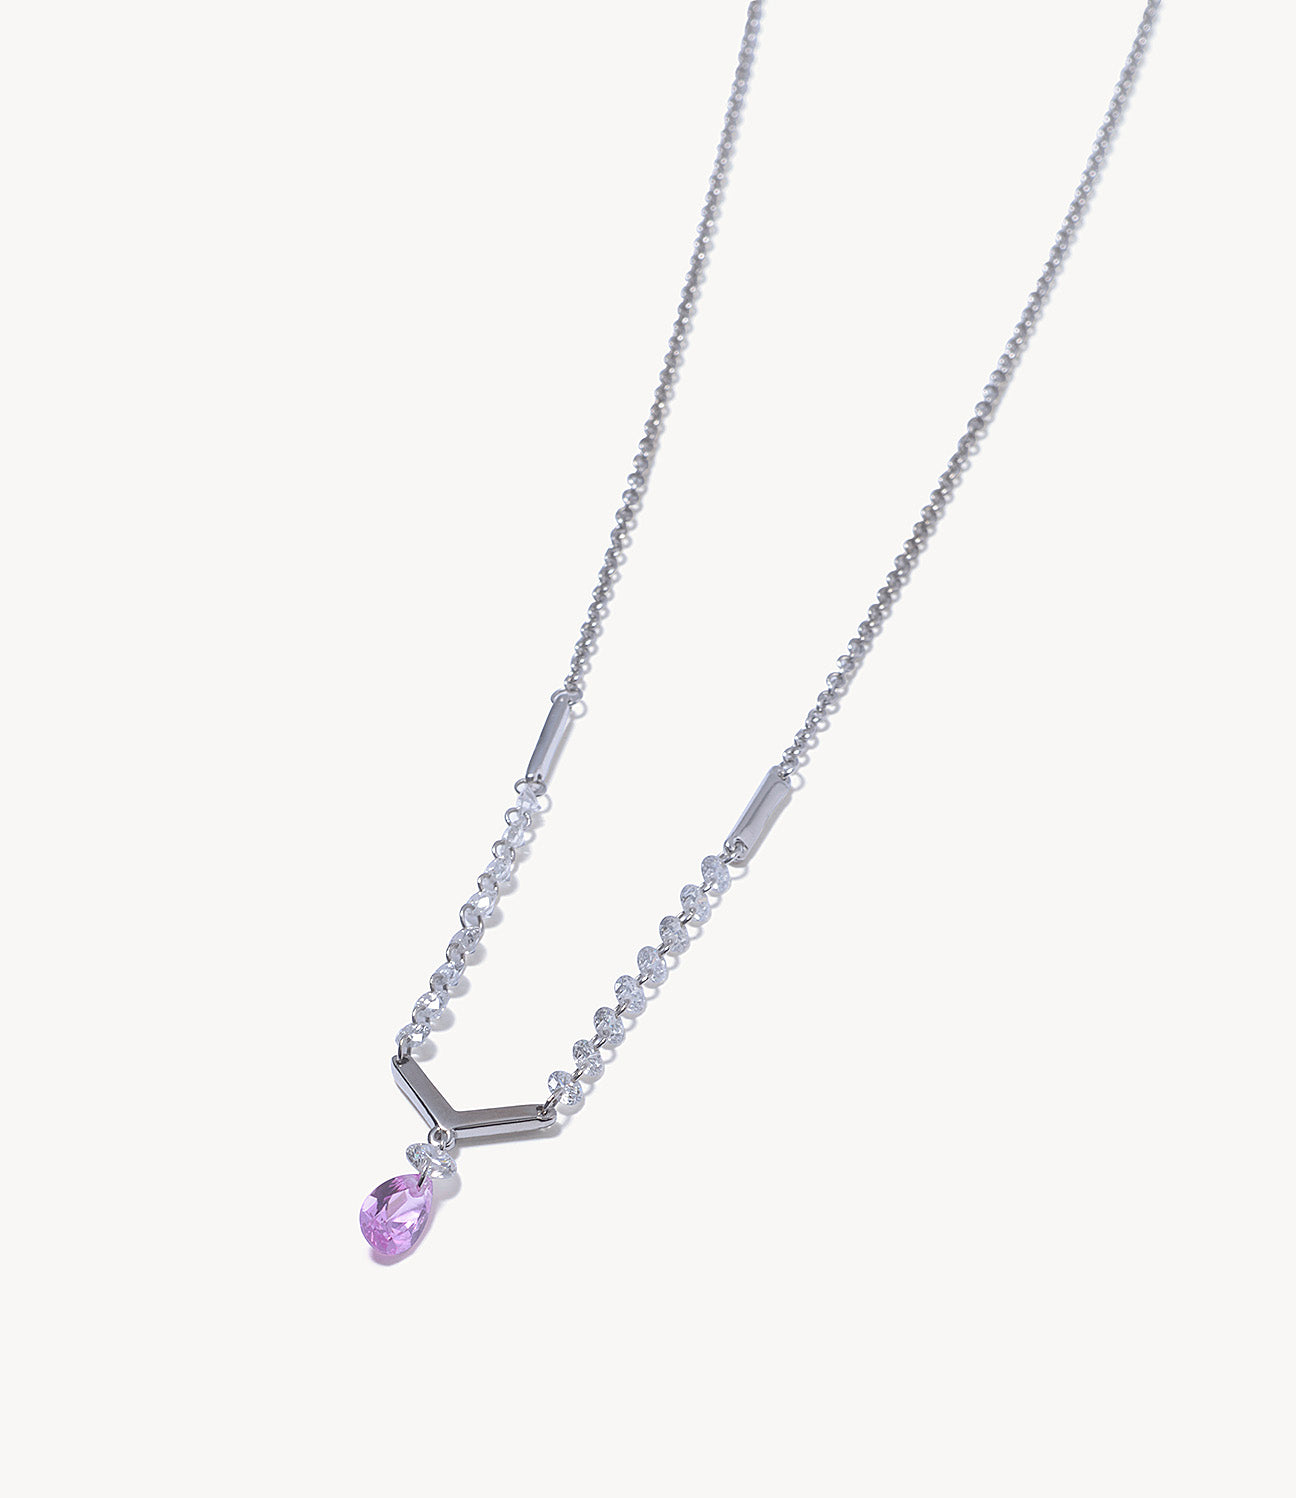 Pink Sapphire Teardrop Necklace with Drilled Diamond Chain